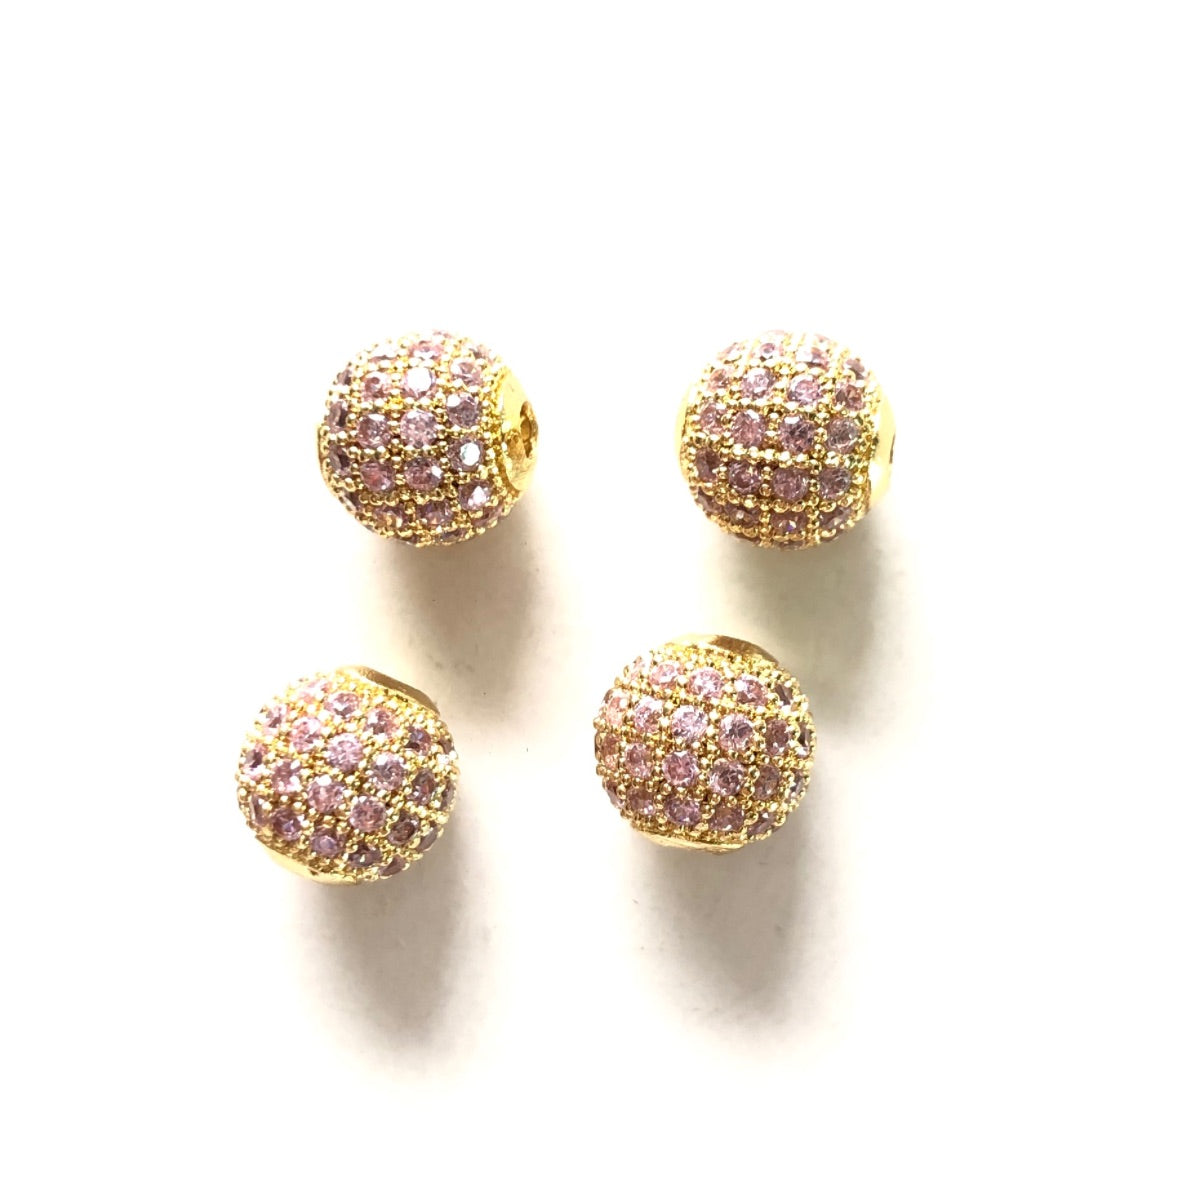 10pcs/lot 6mm, 8mm Colorful CZ Paved Ball Spacers Gold Pink CZ Paved Spacers 6mm Beads 8mm Beads Ball Beads Colorful Zirconia New Spacers Arrivals Charms Beads Beyond